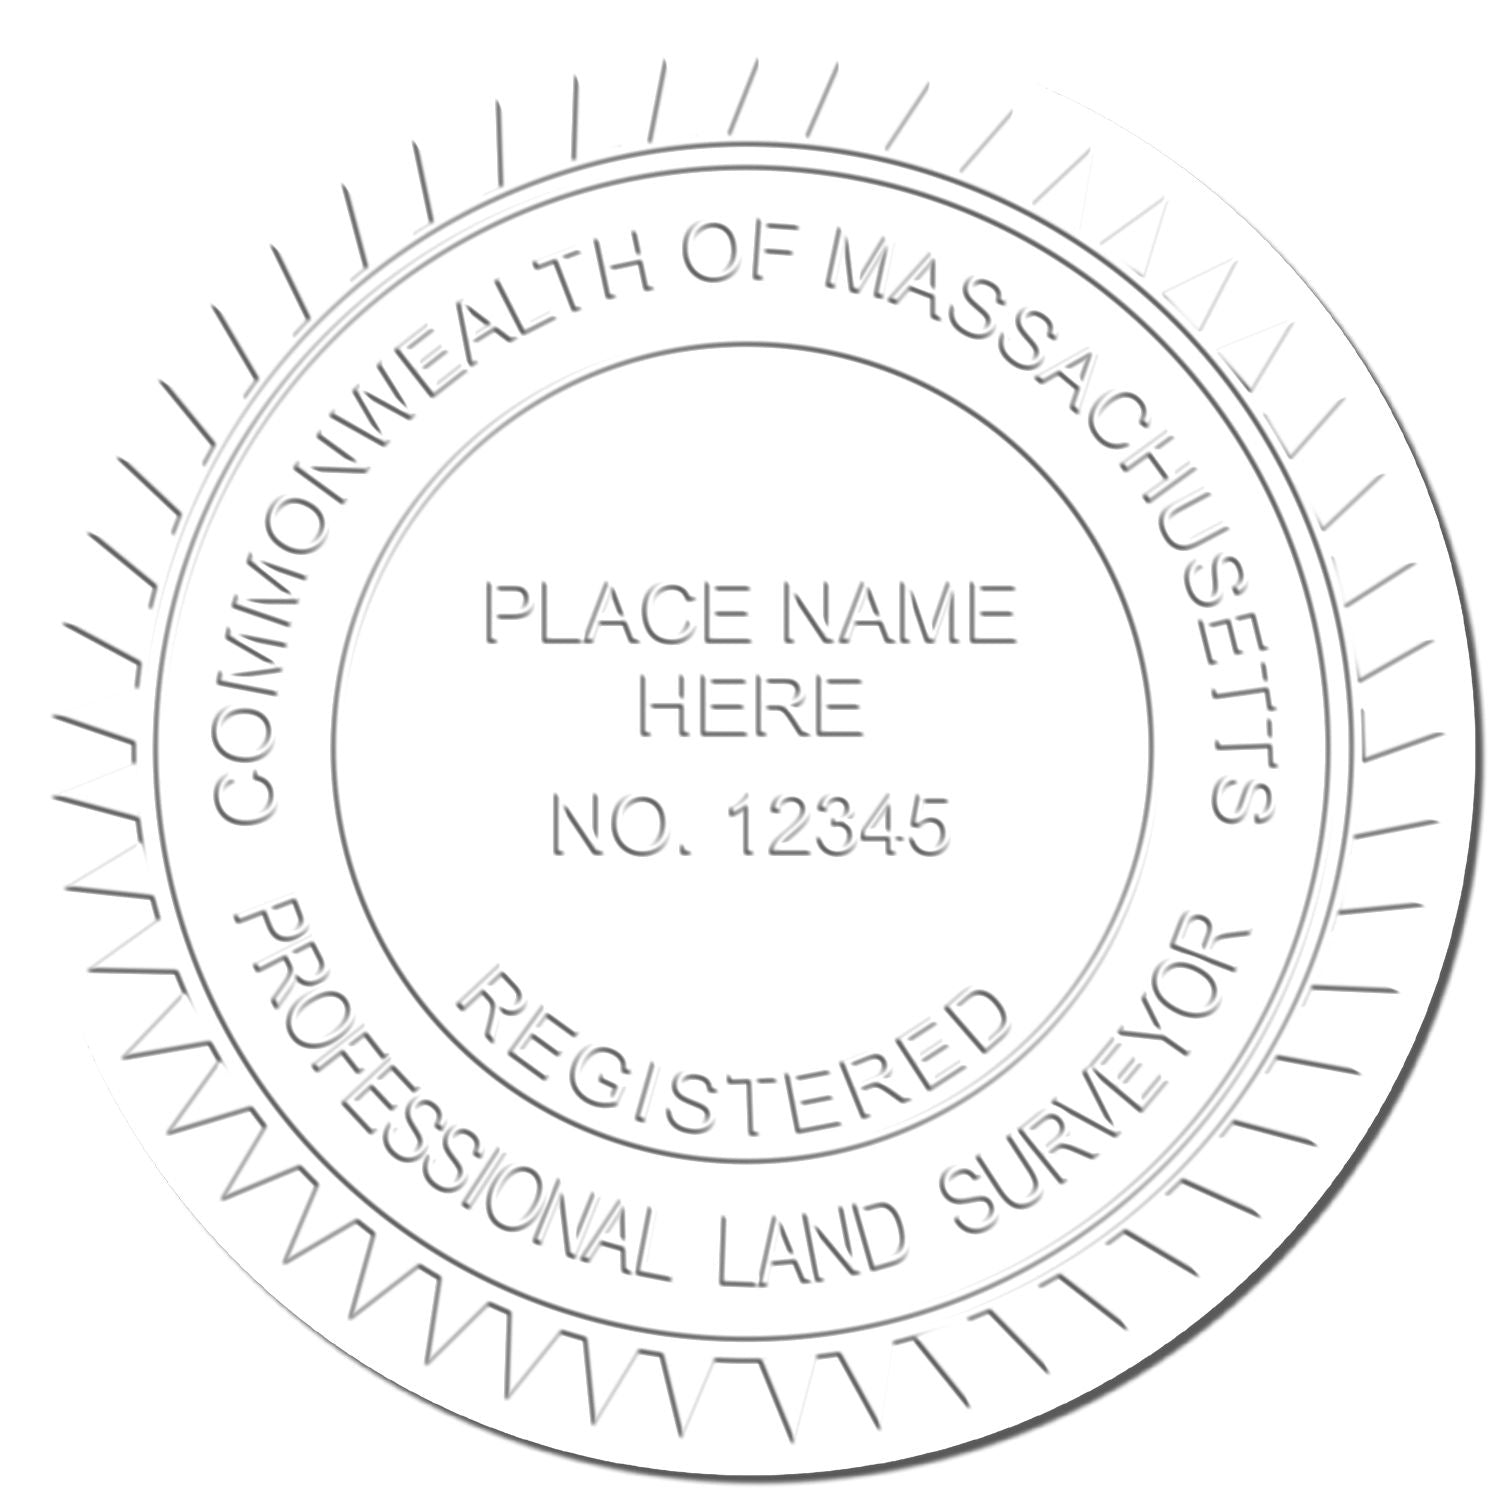 The main image for the Long Reach Massachusetts Land Surveyor Seal depicting a sample of the imprint and electronic files